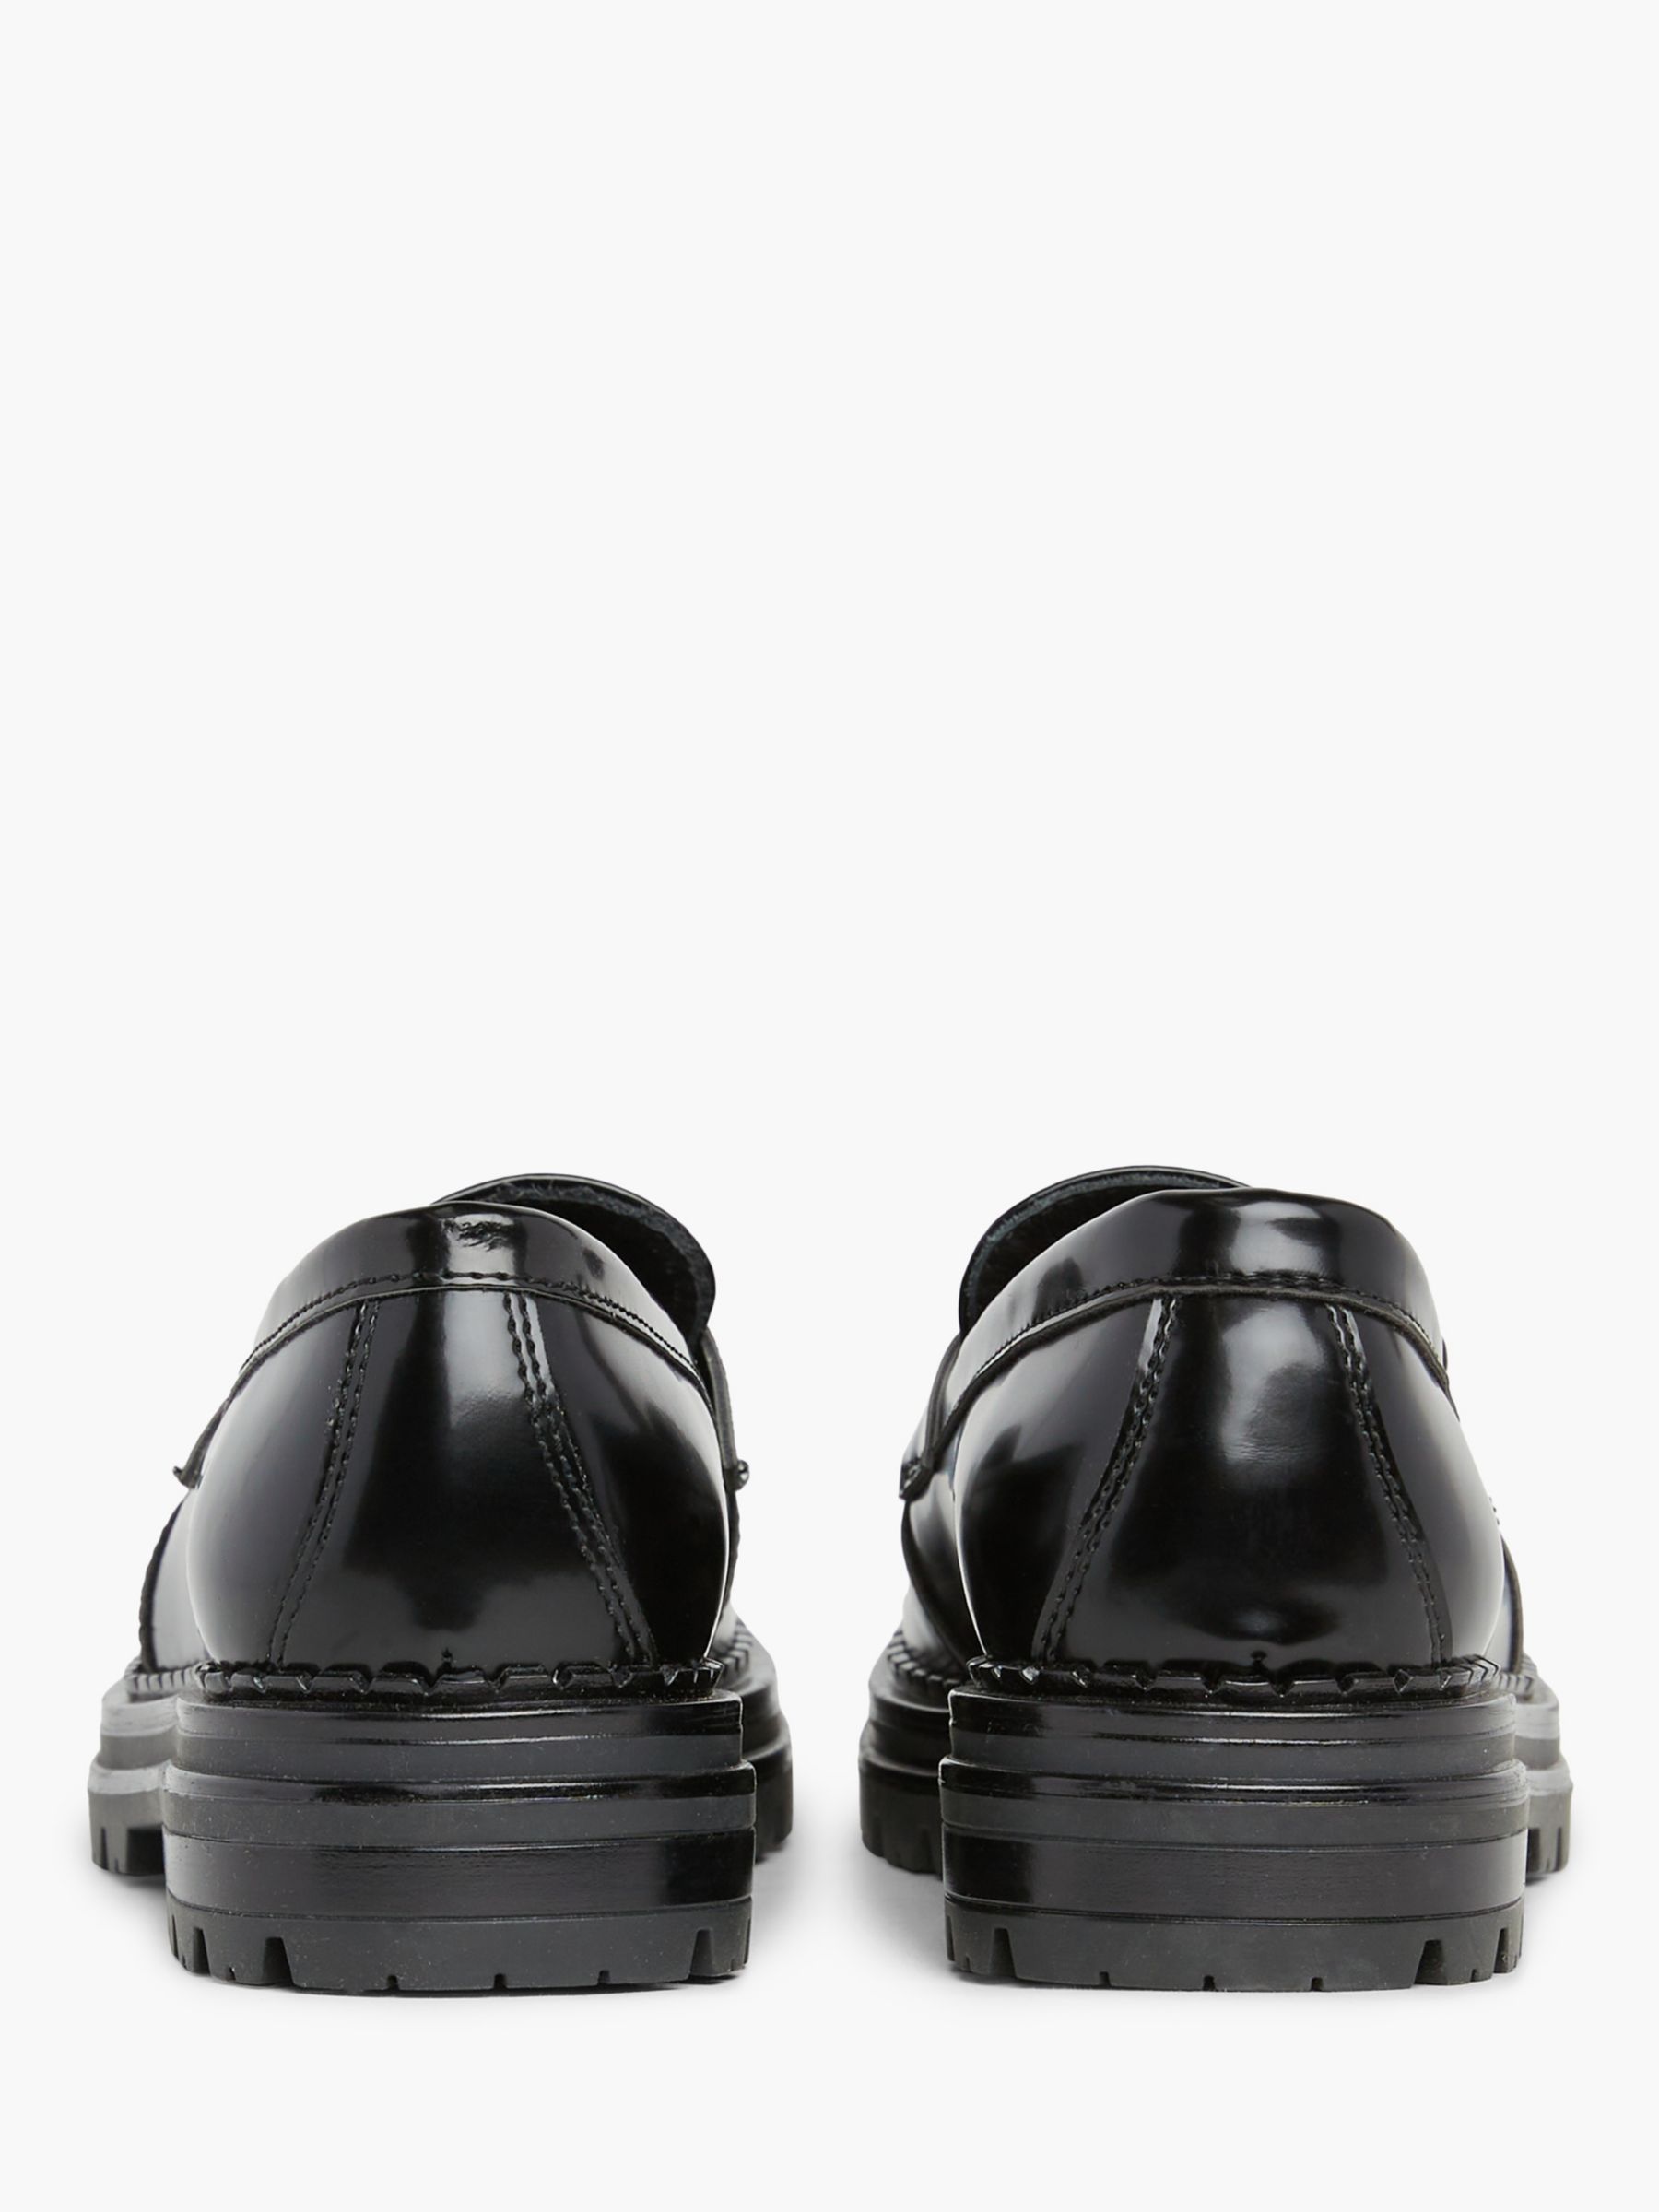 Calvin Klein Kids' Chunky Loafer Shoes, Black, 29